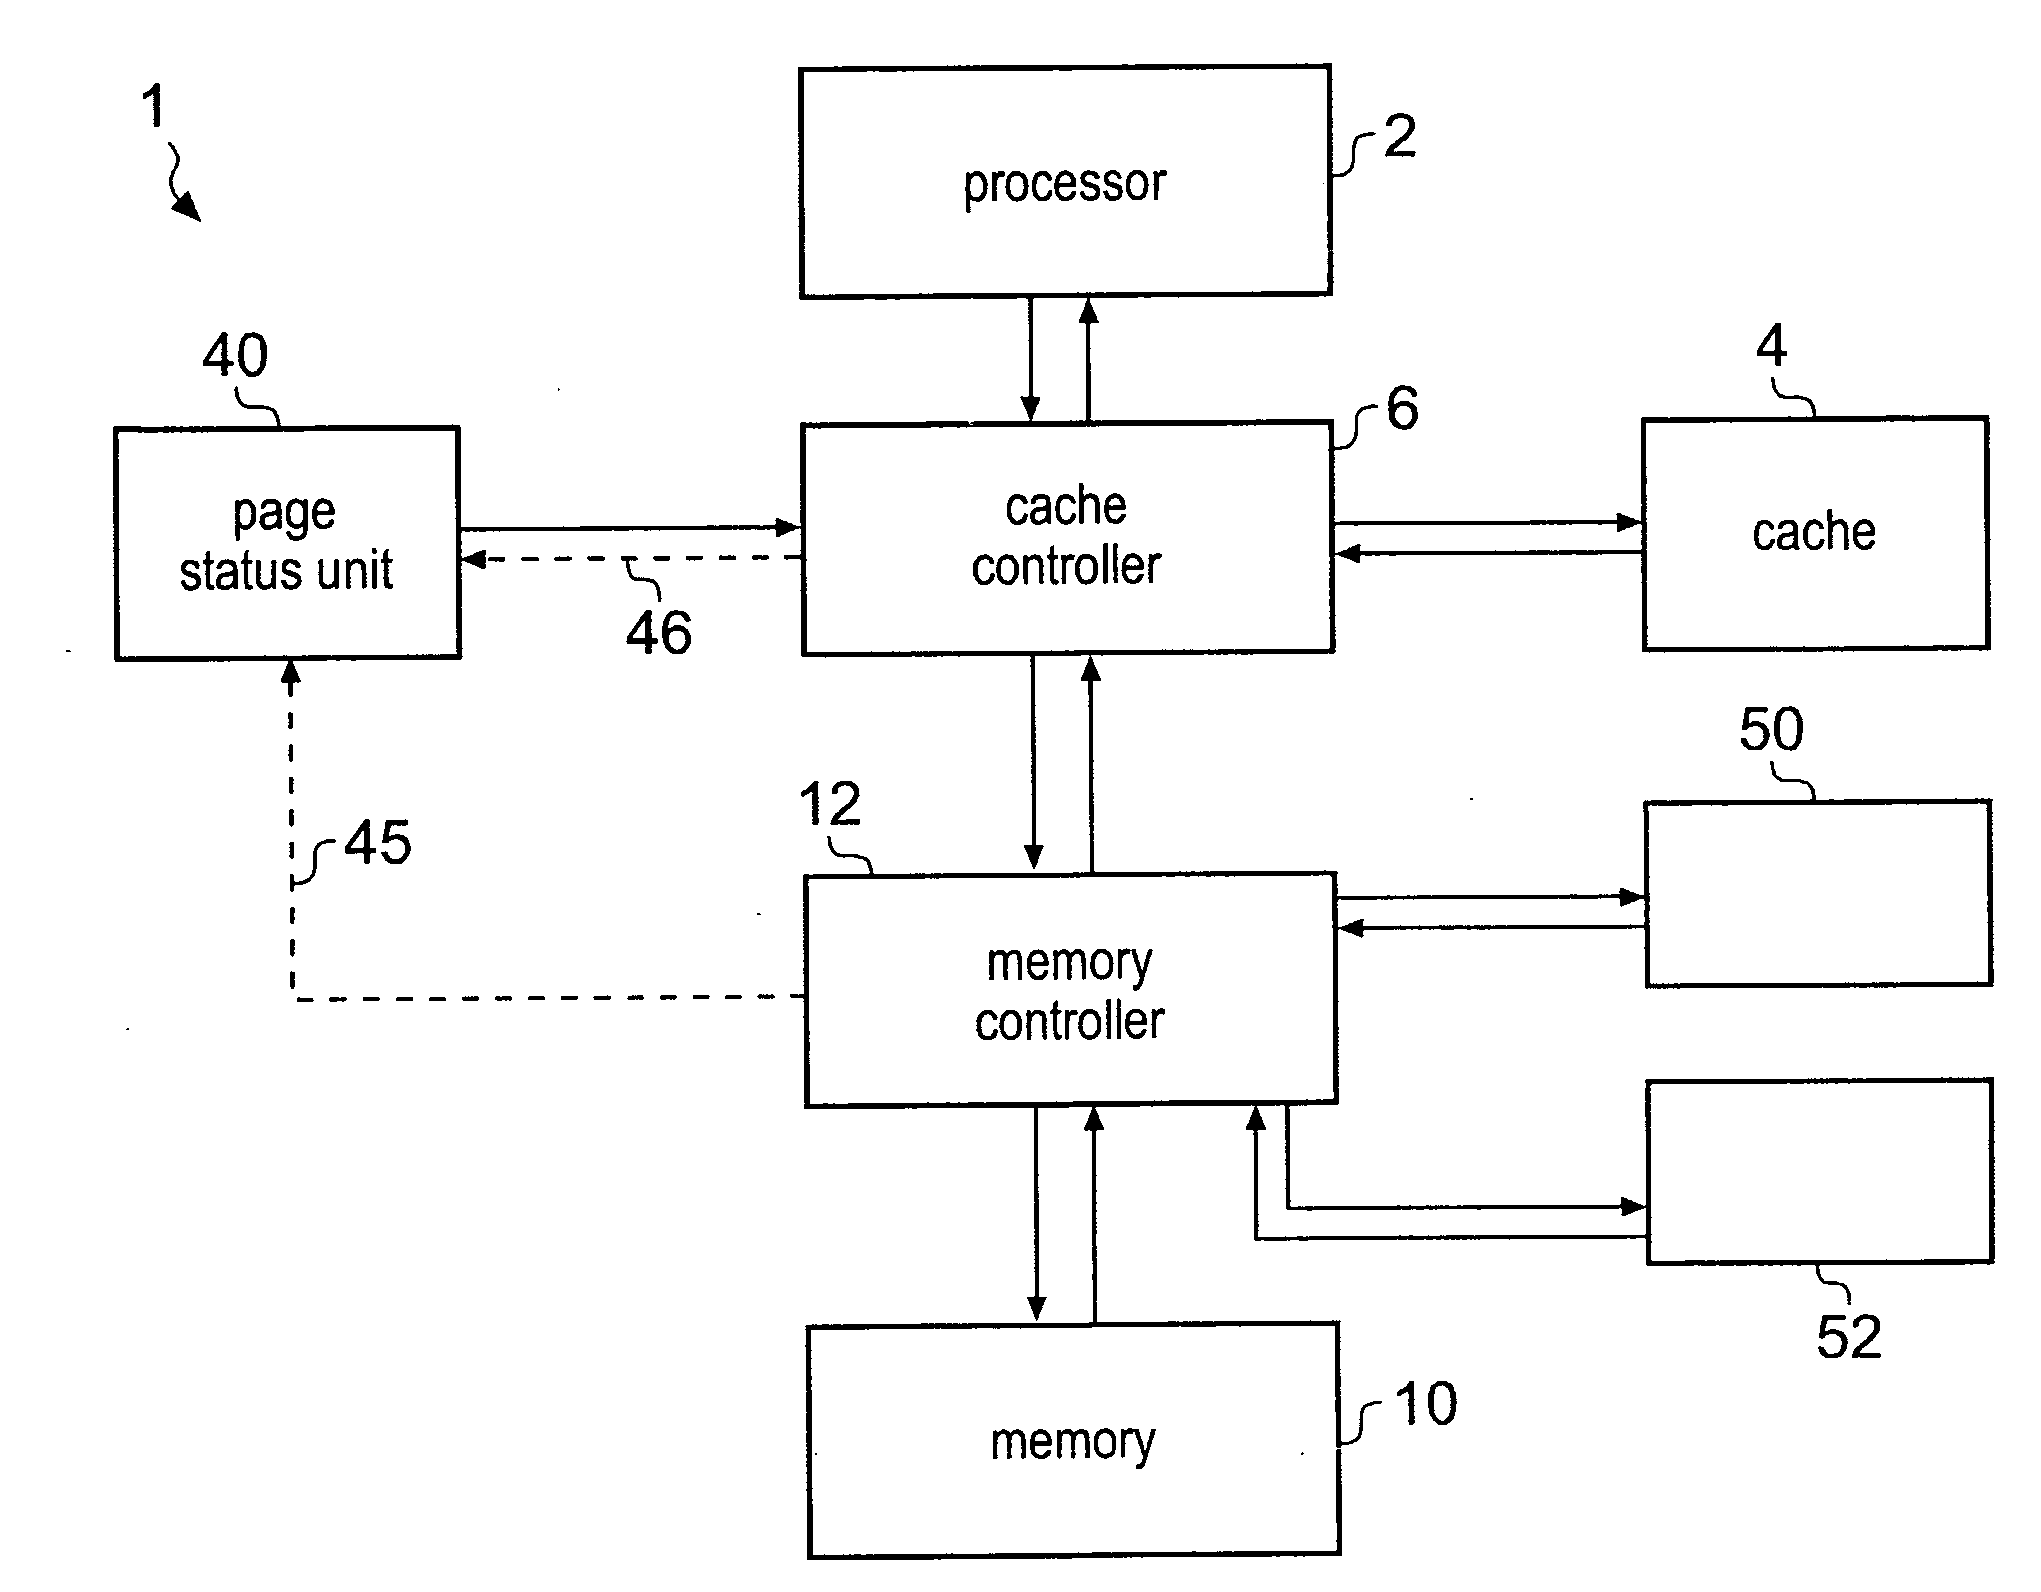 Efficiency of cache memory operations